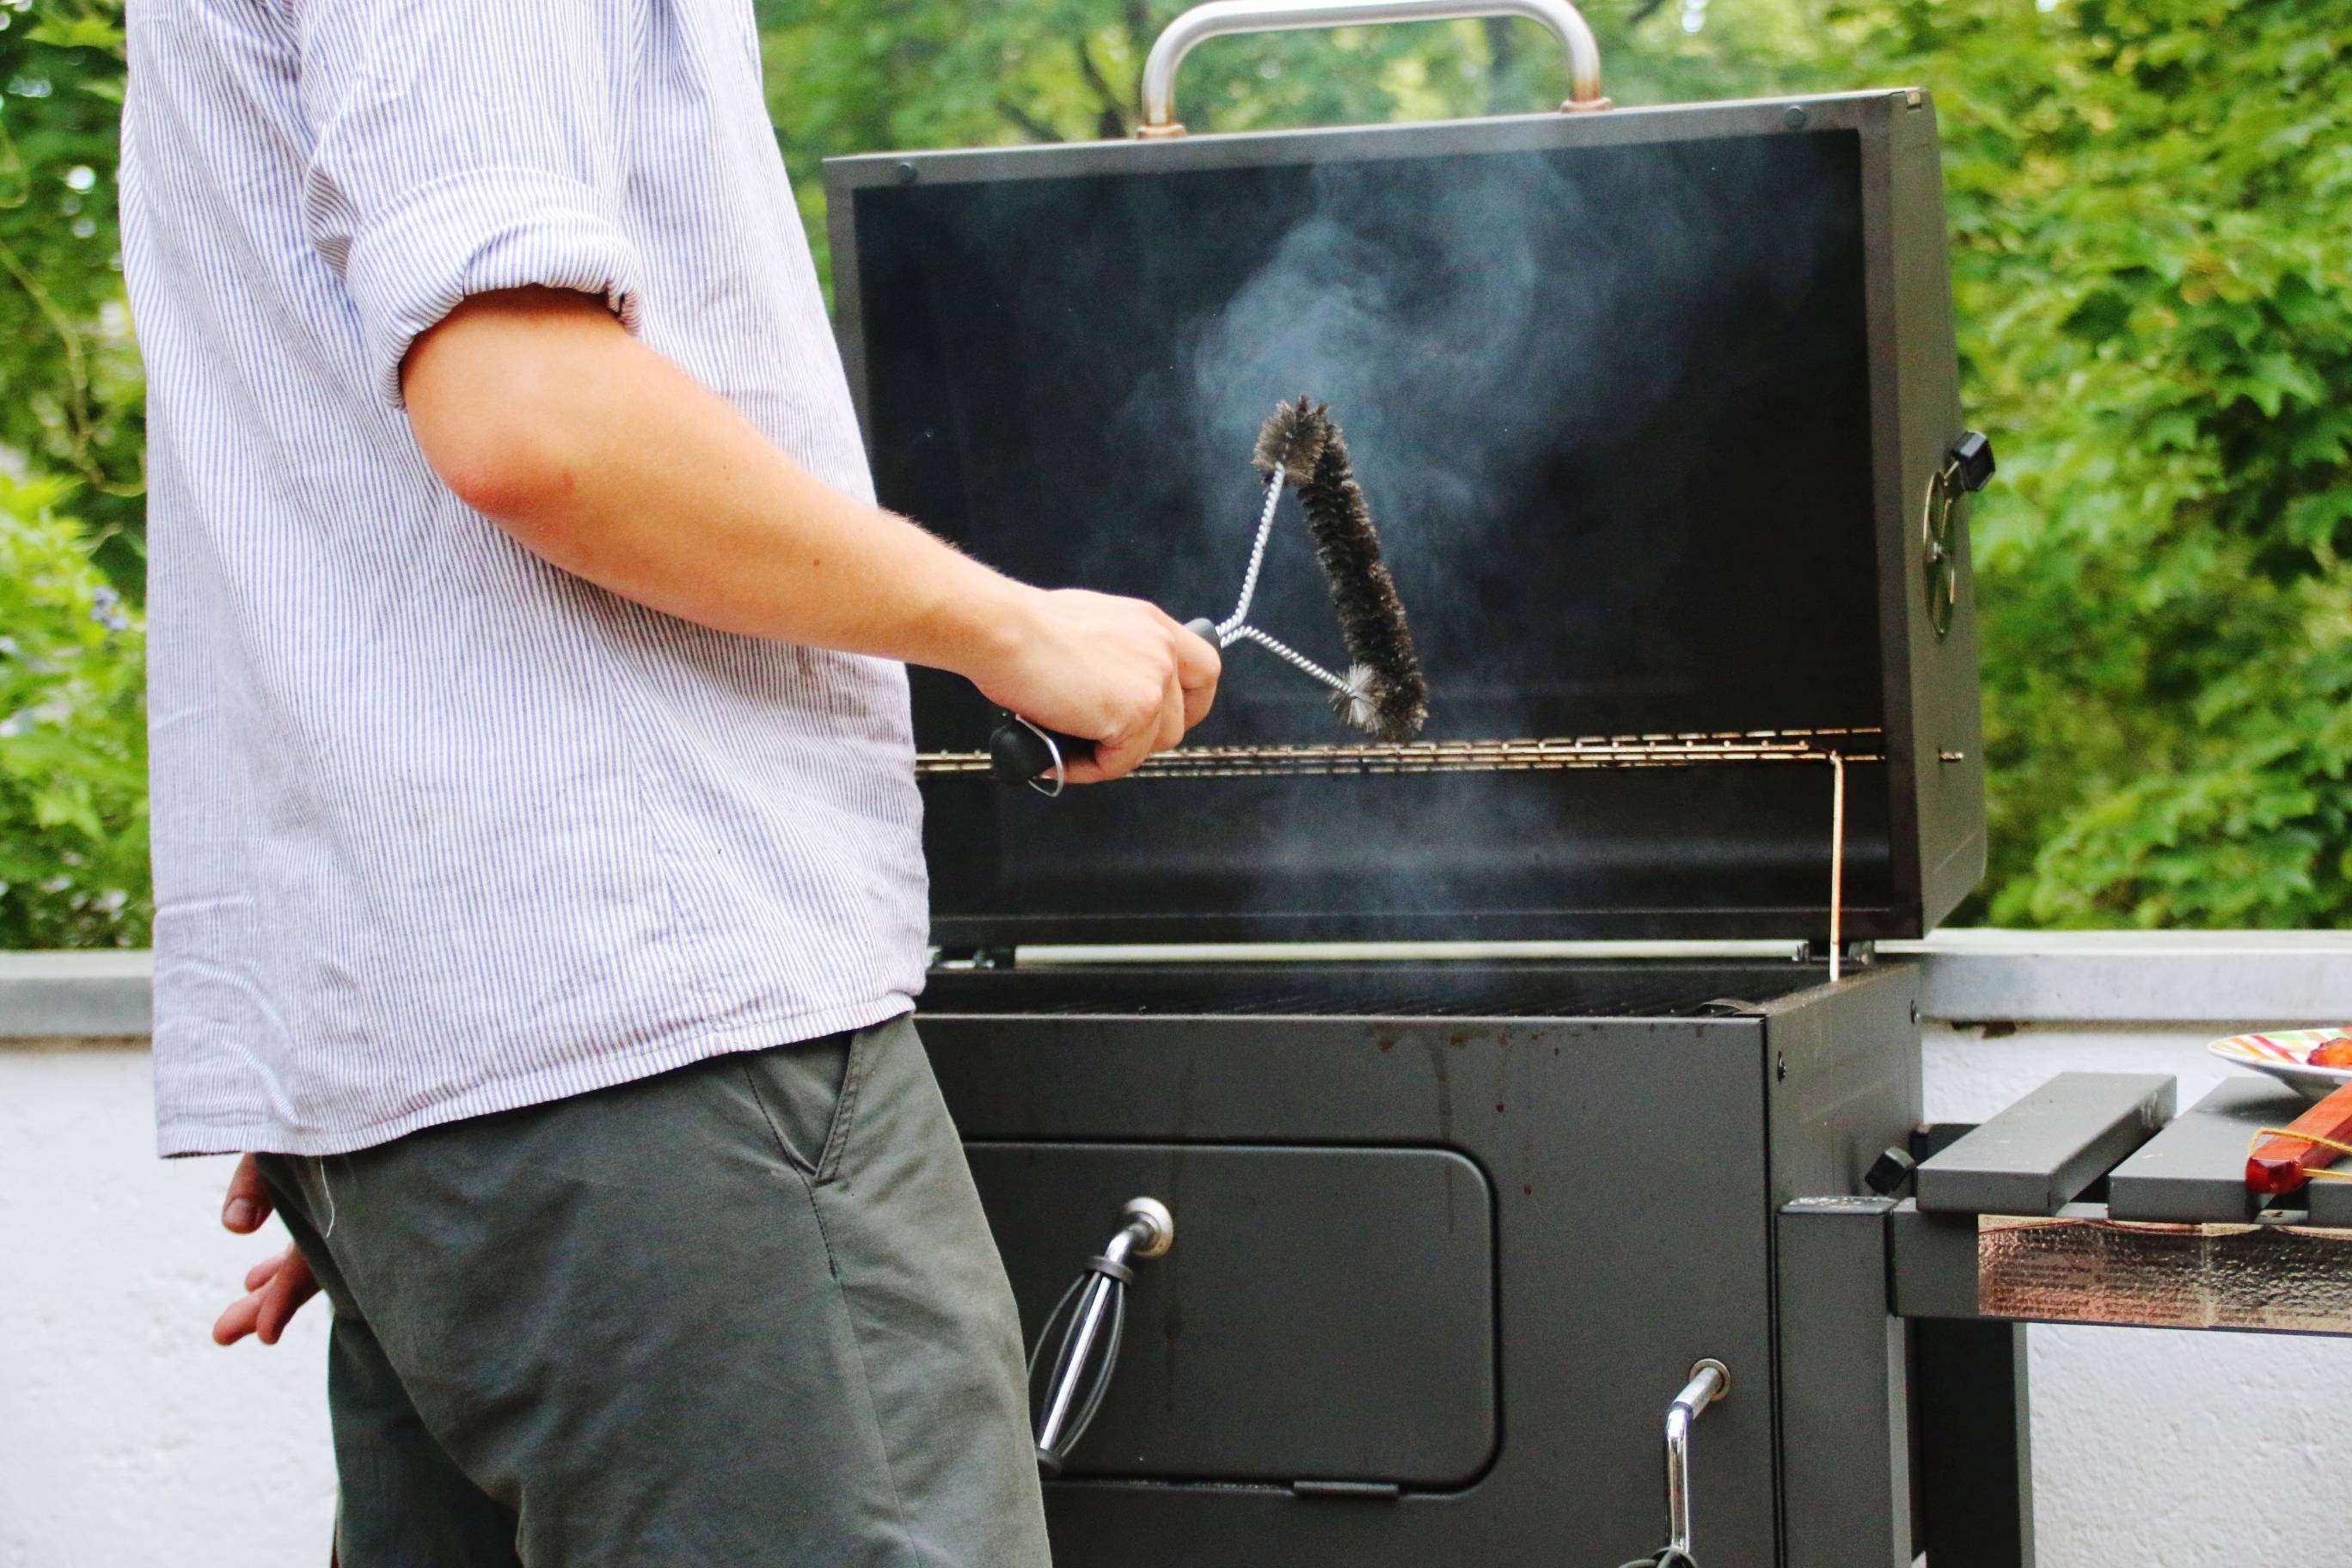 How to cool down a charcoal grill
